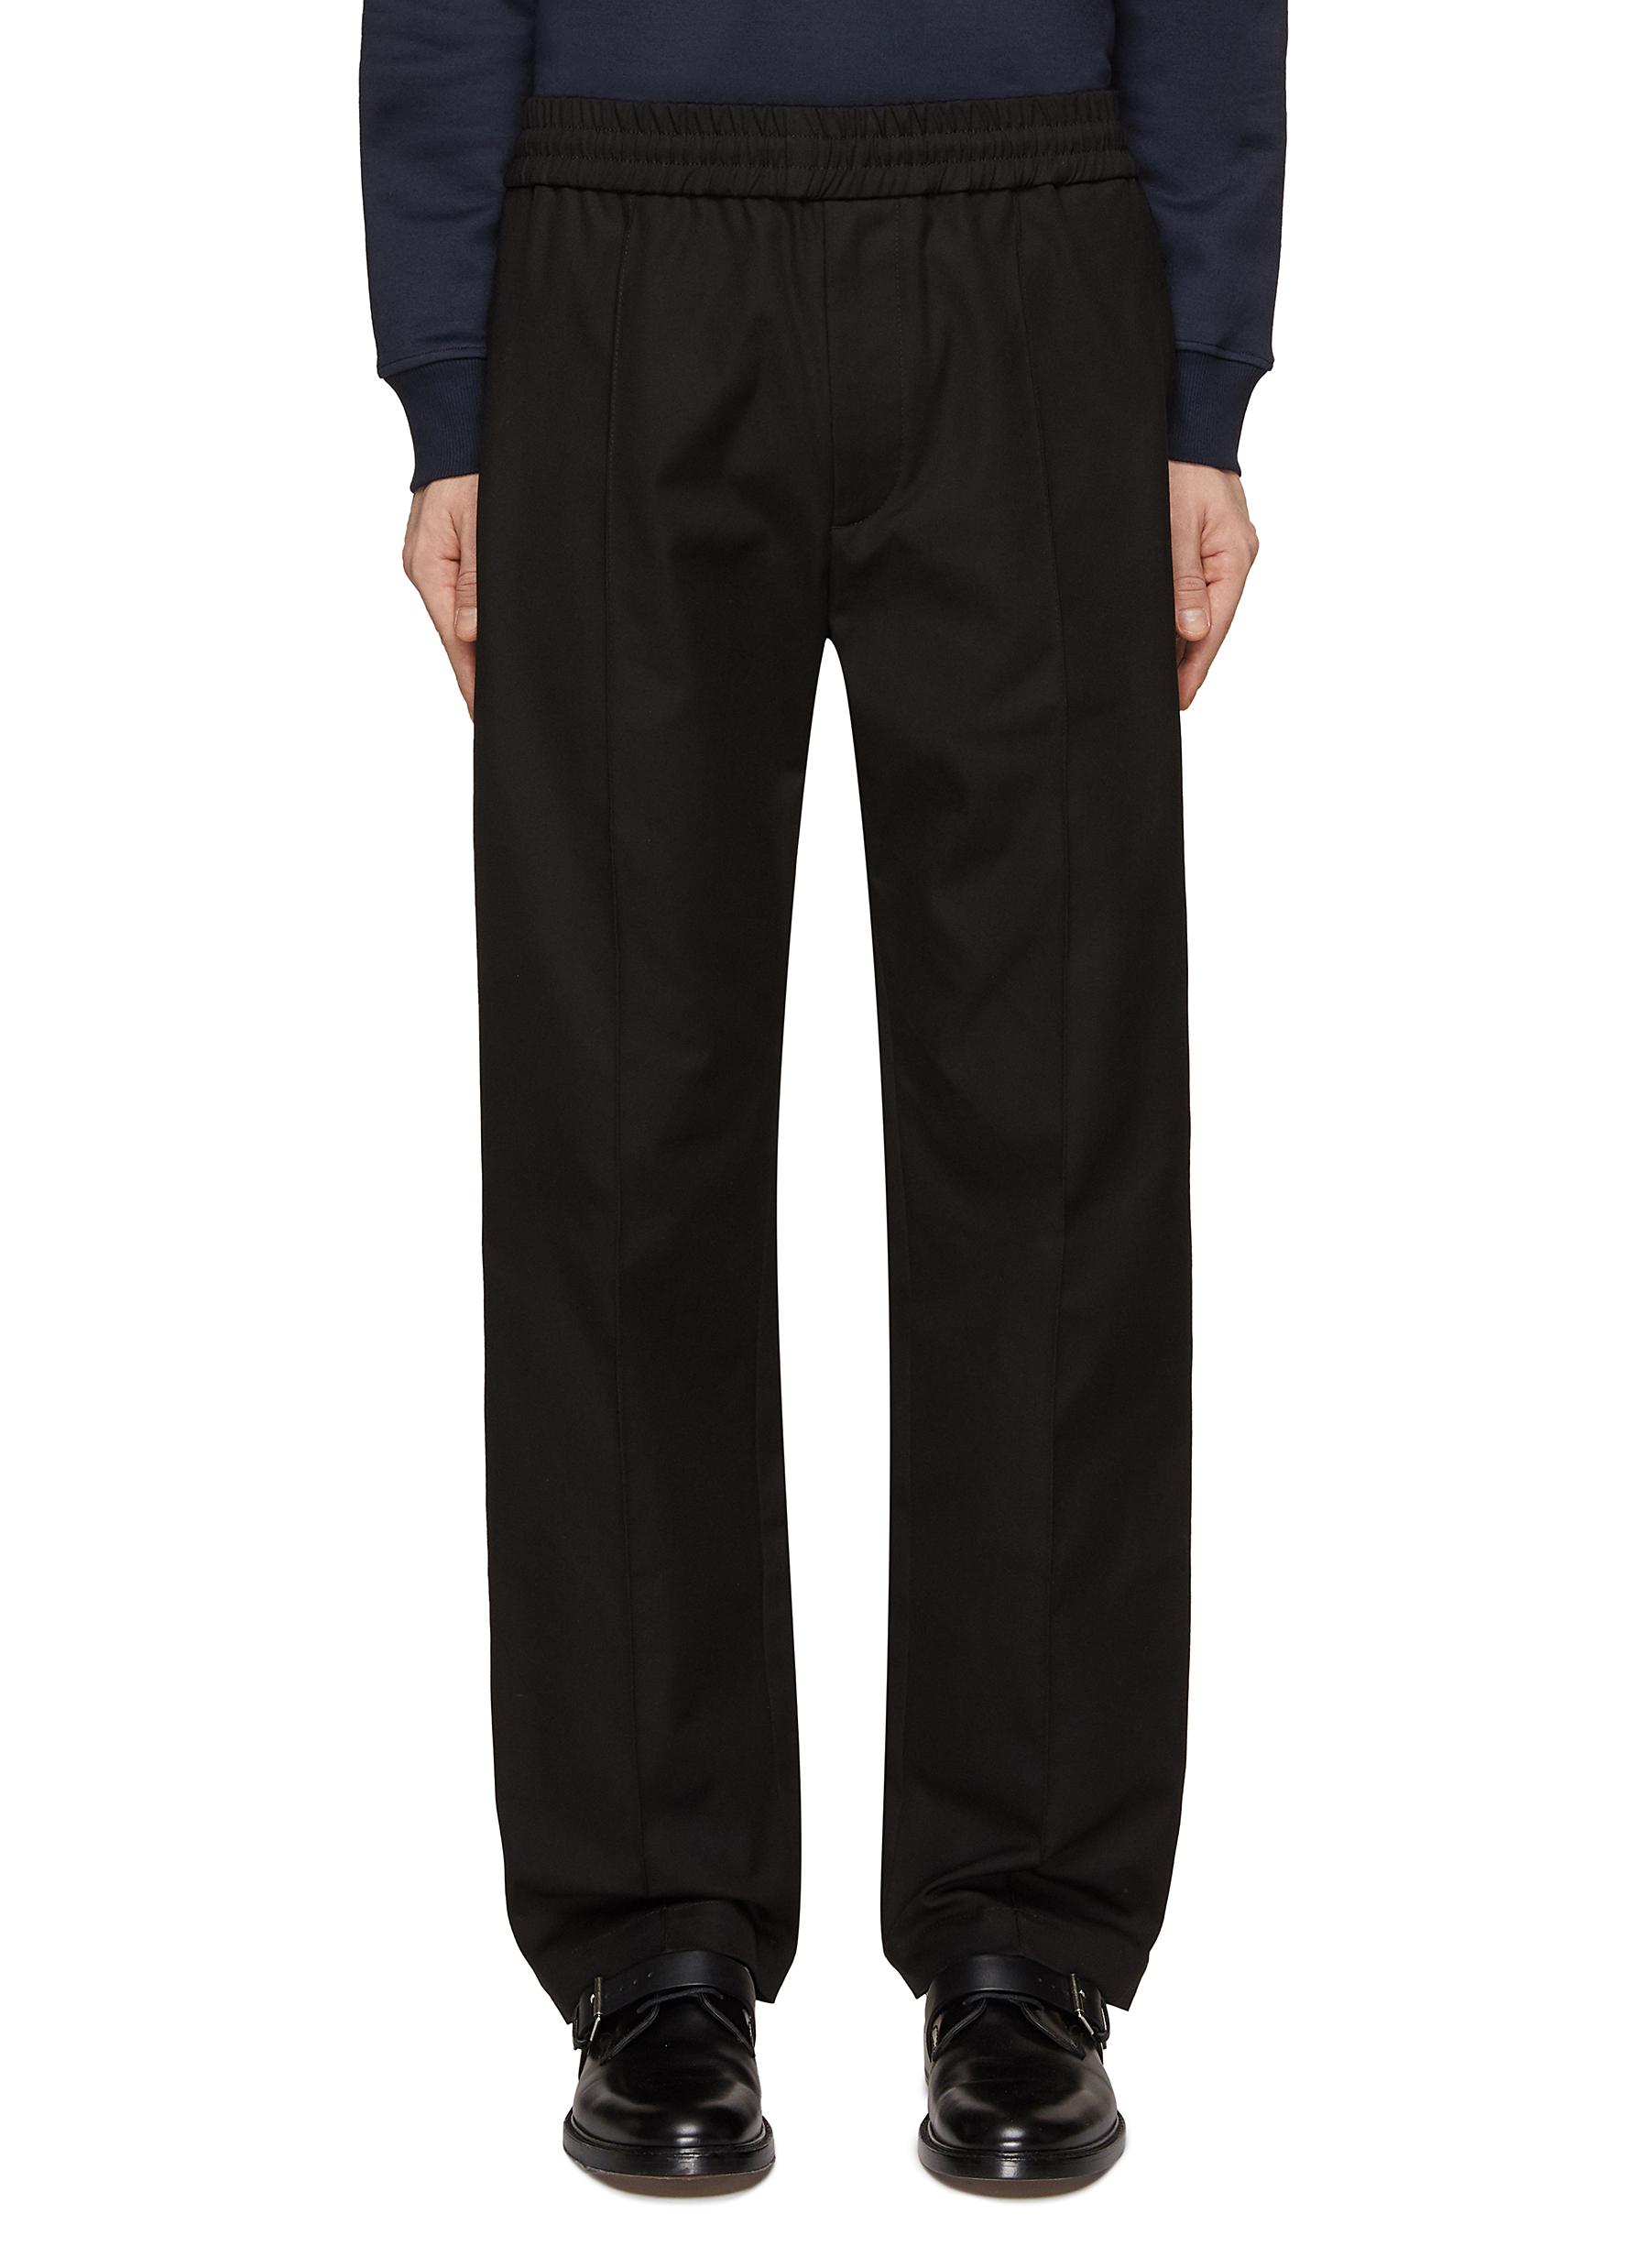 Valentino Rudy Mens Pants, Men's Fashion, Bottoms, Trousers on Carousell